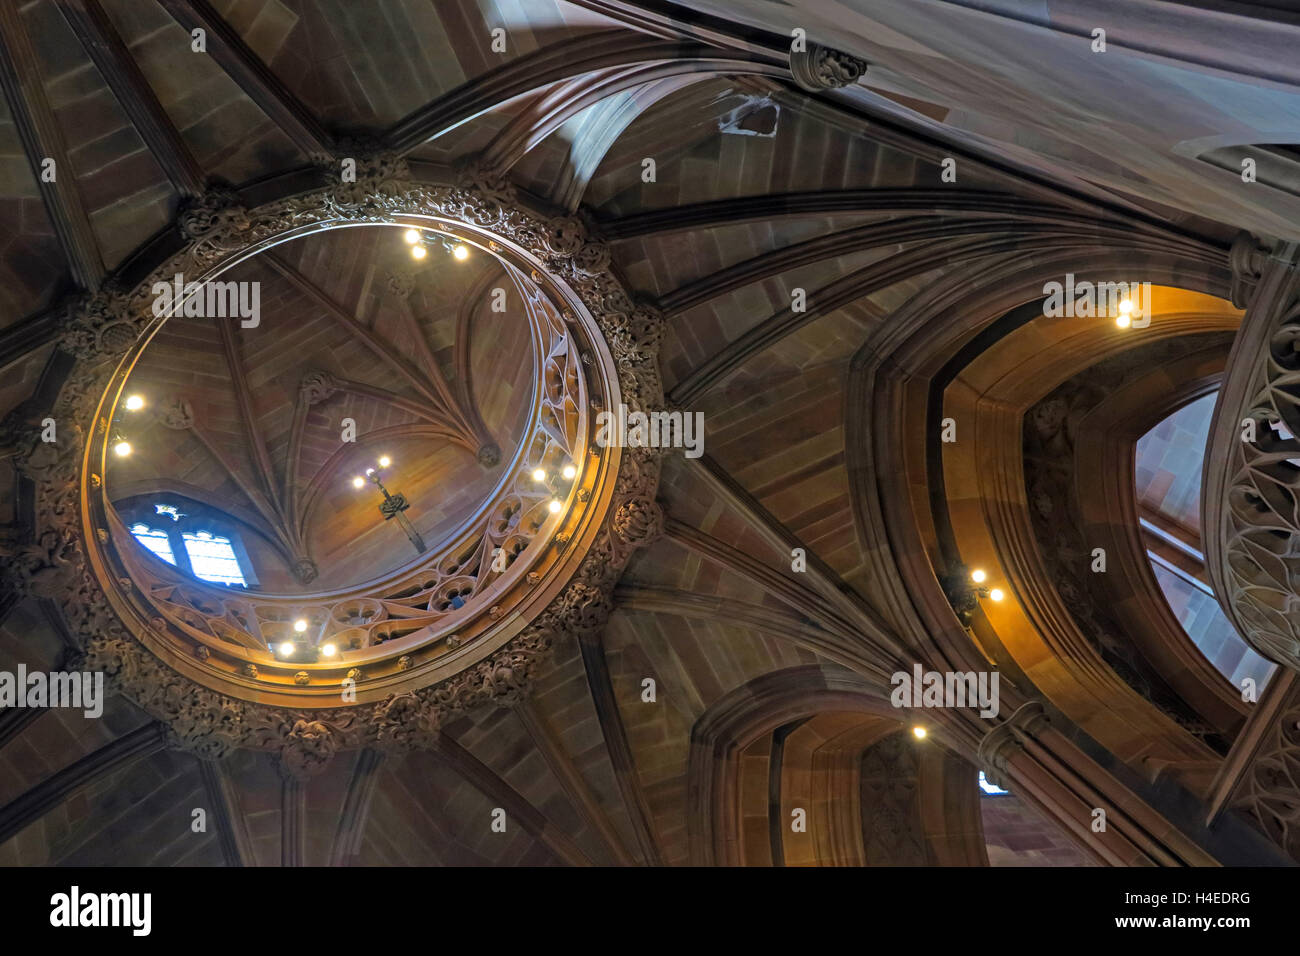 John Rylands Historic Library Ceiling,Deansgate,Manchester,England,UK Stock Photo